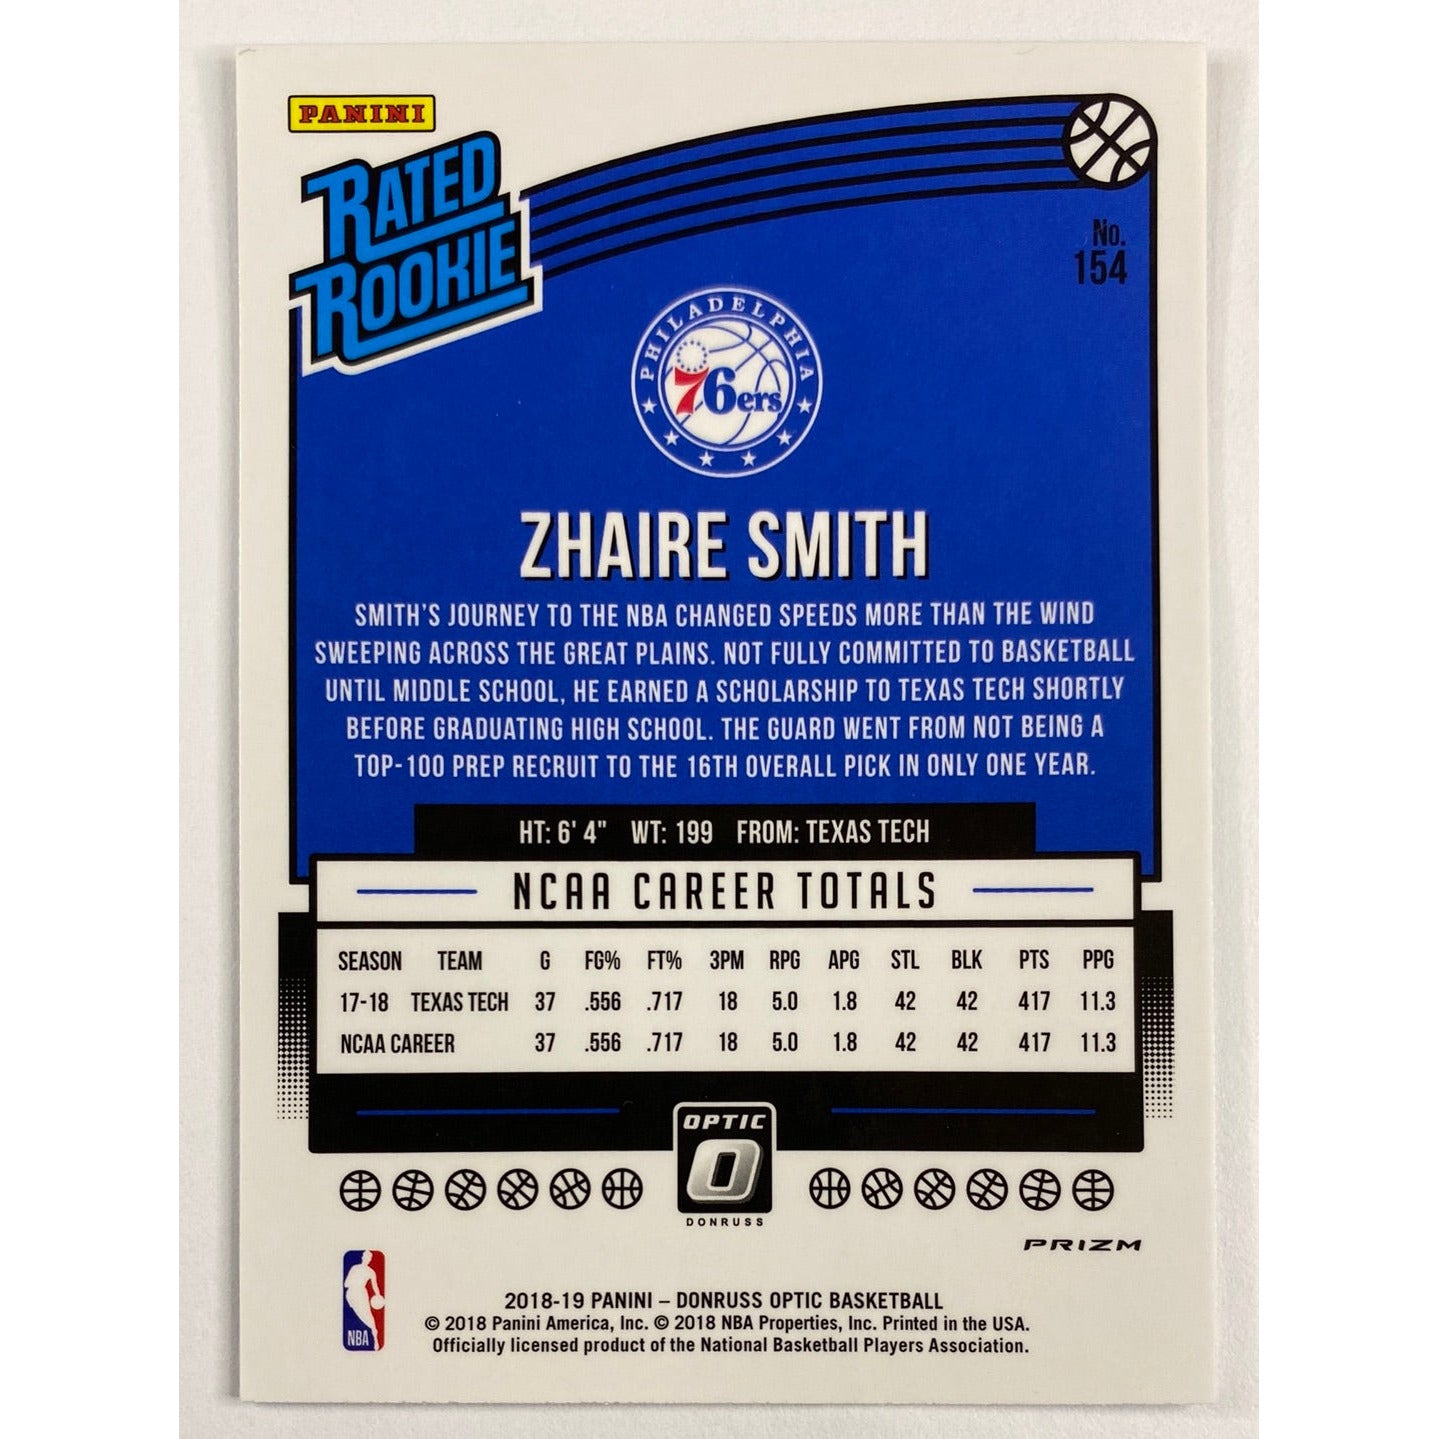 2018-19 Donruss Optic Zhaire Smith Rated Rookie Silver Shock Prizm